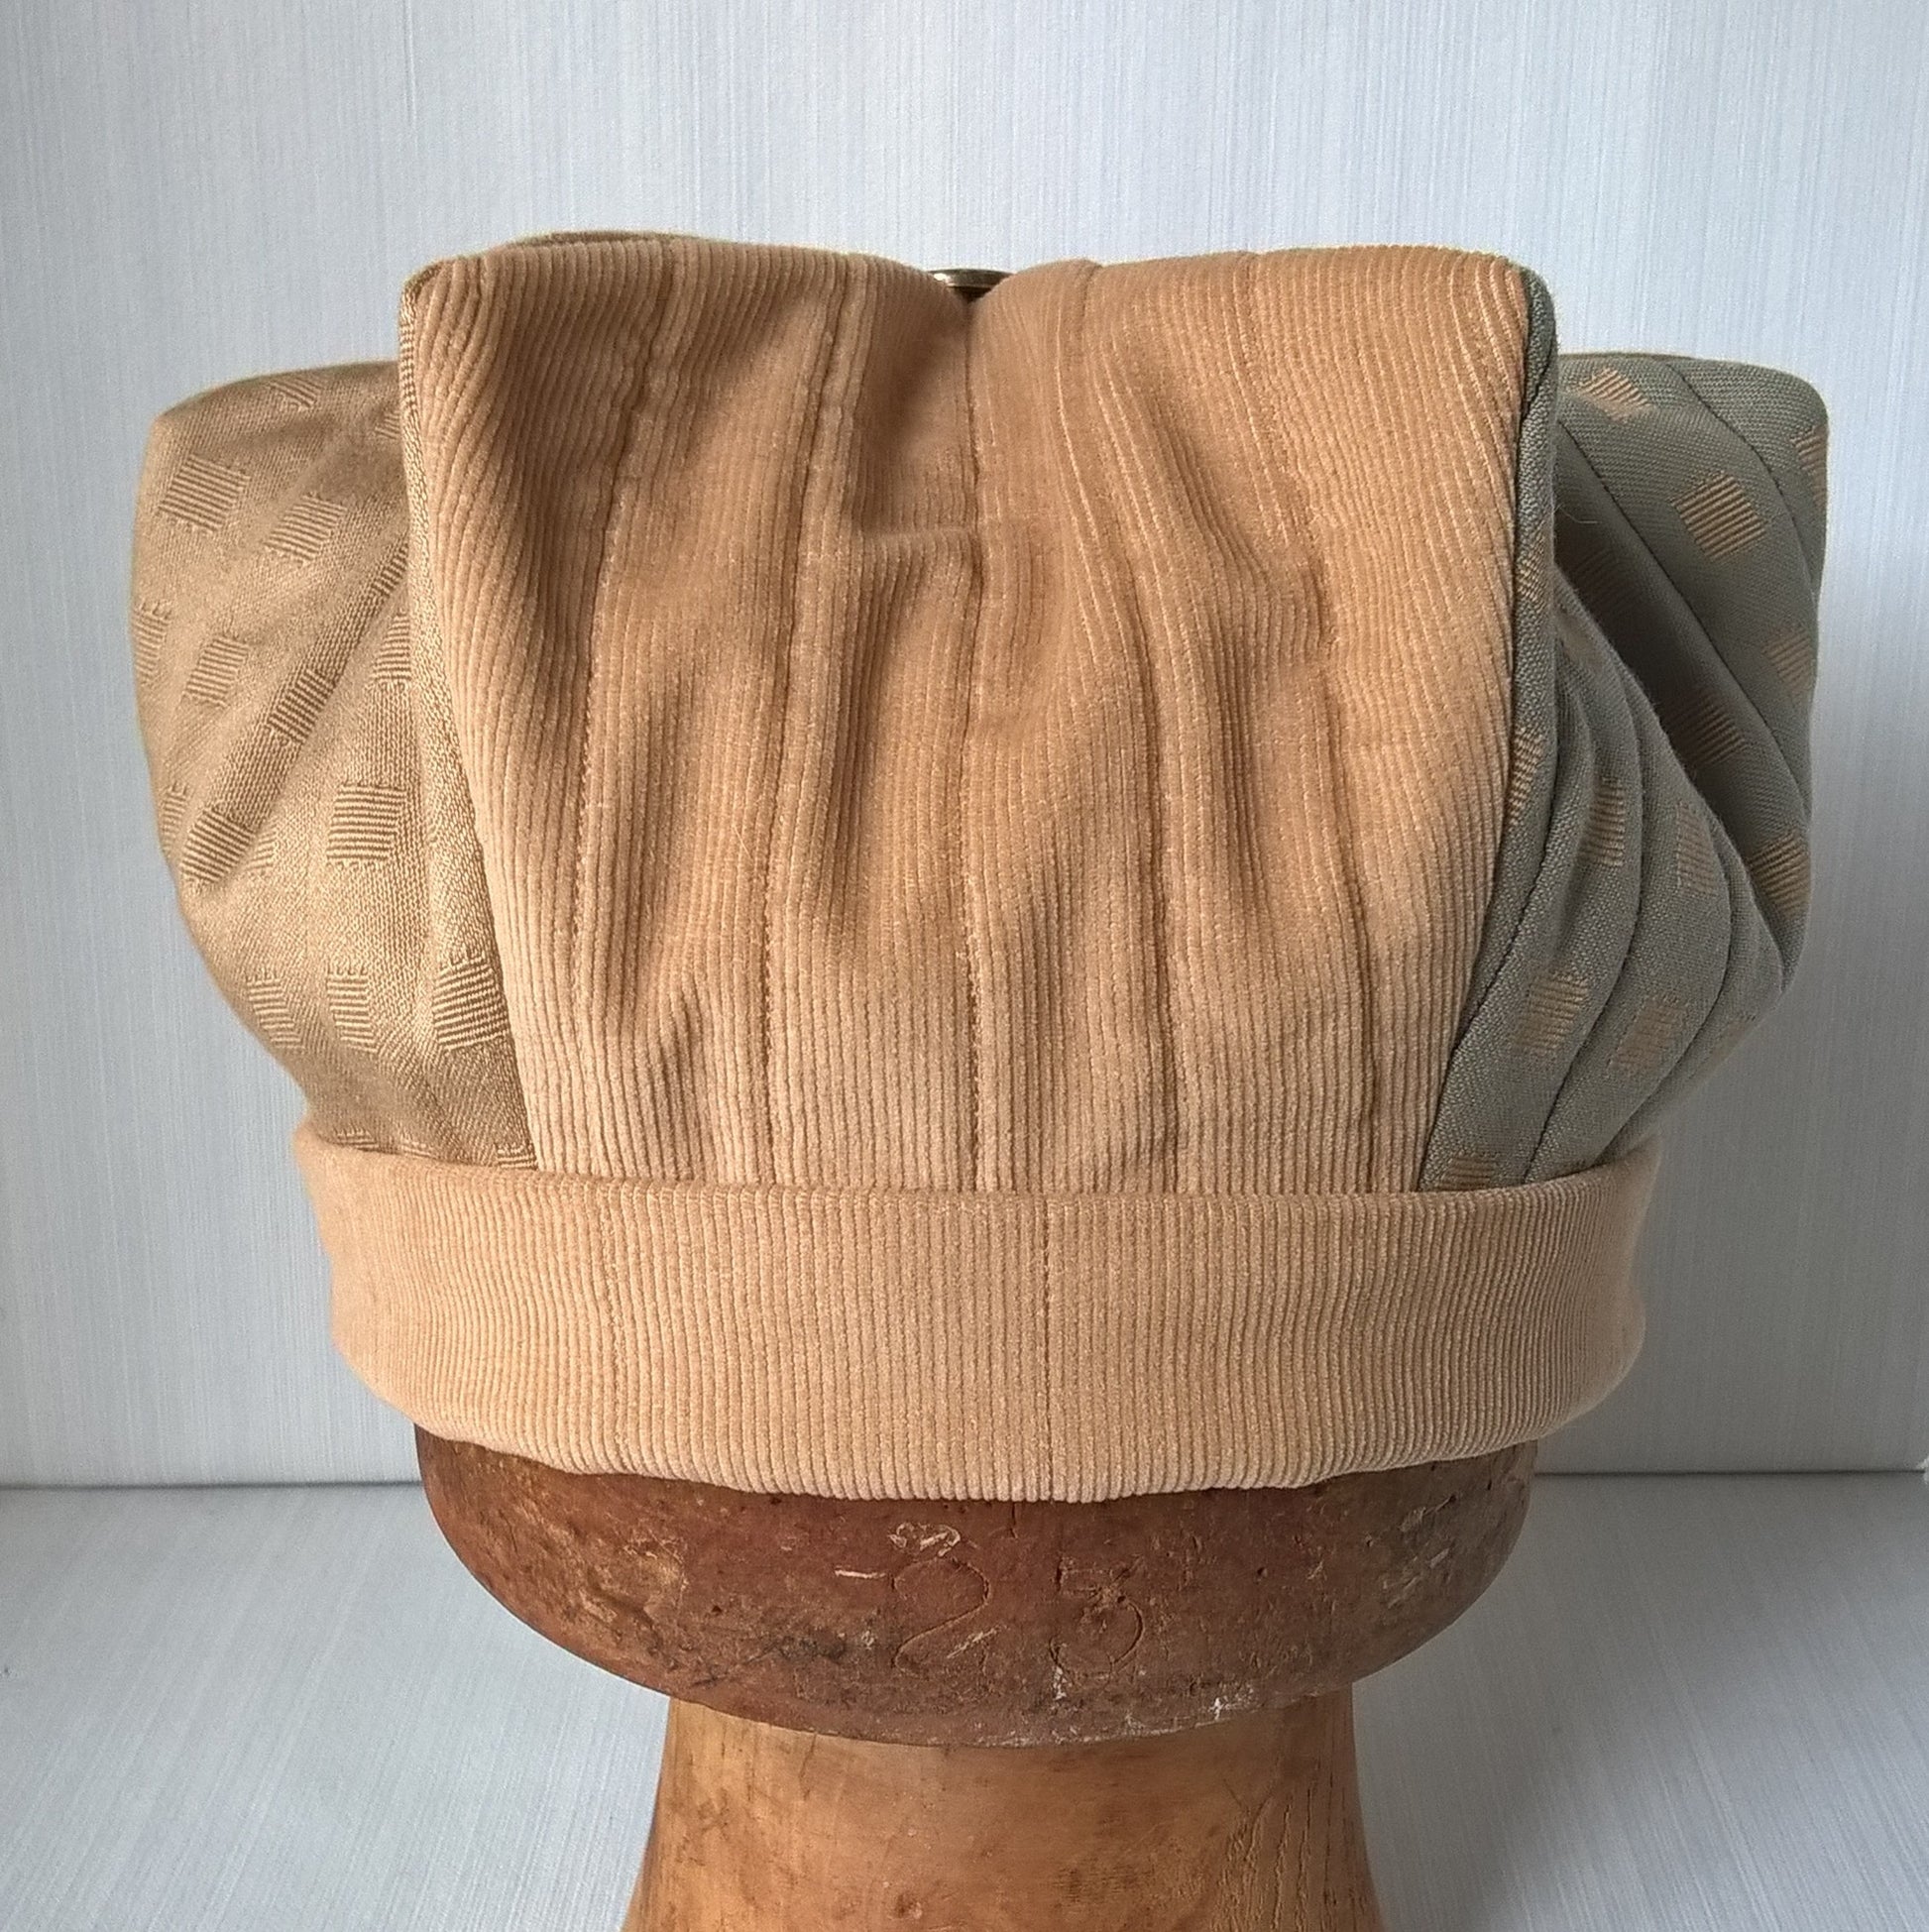 The hat is lightly quilted to form the crown shape